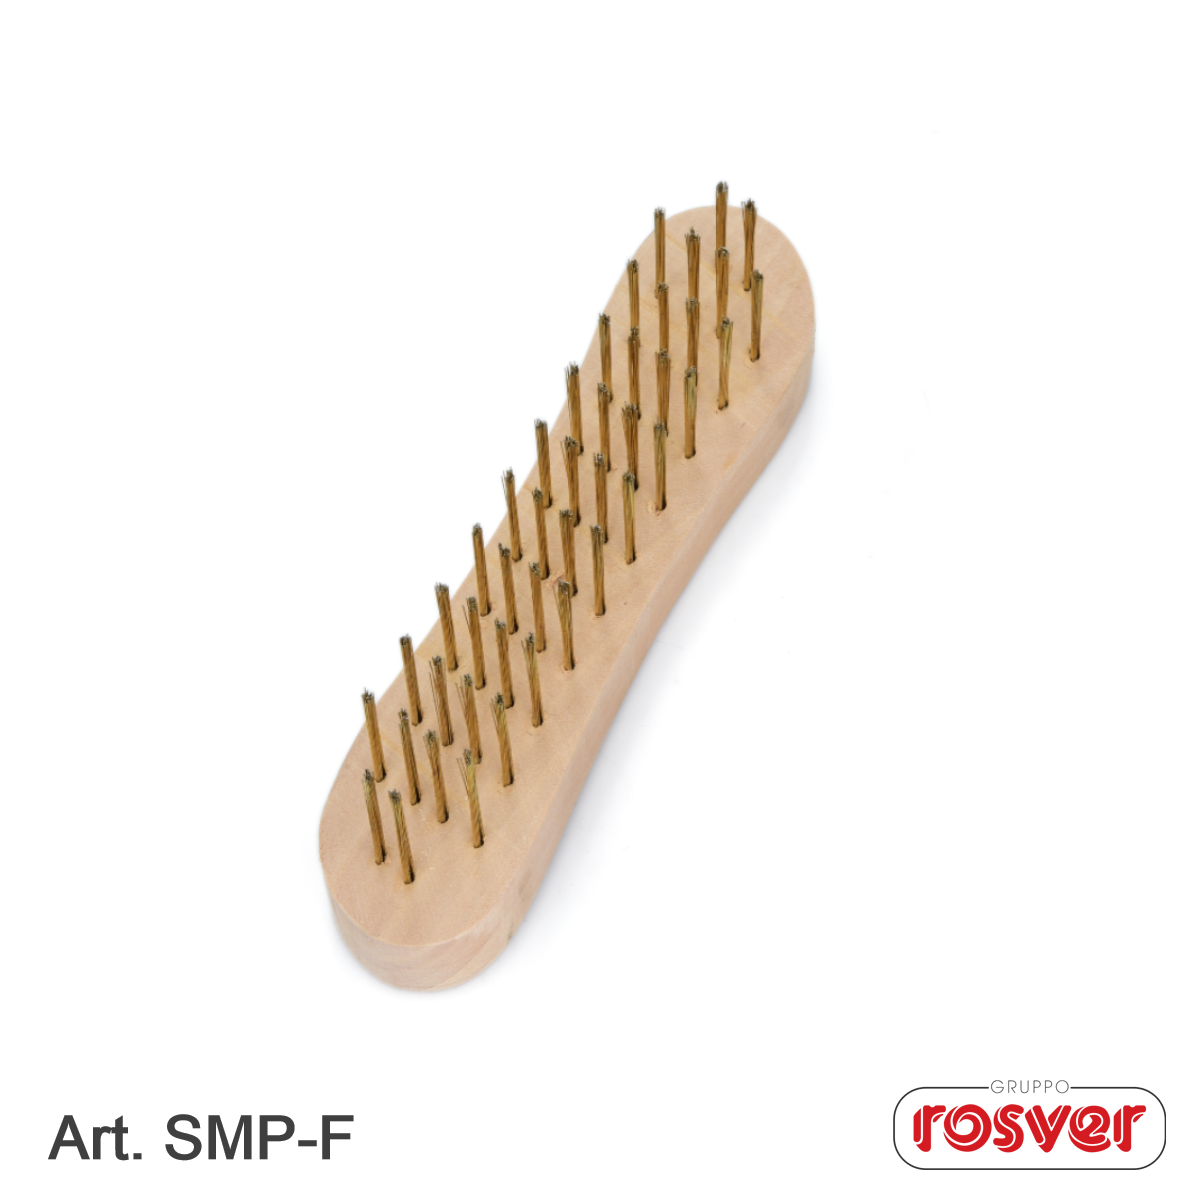 Hand Brushes Steel Manico in Legno SMP-F 190mm 4x12 Rosver 10pz